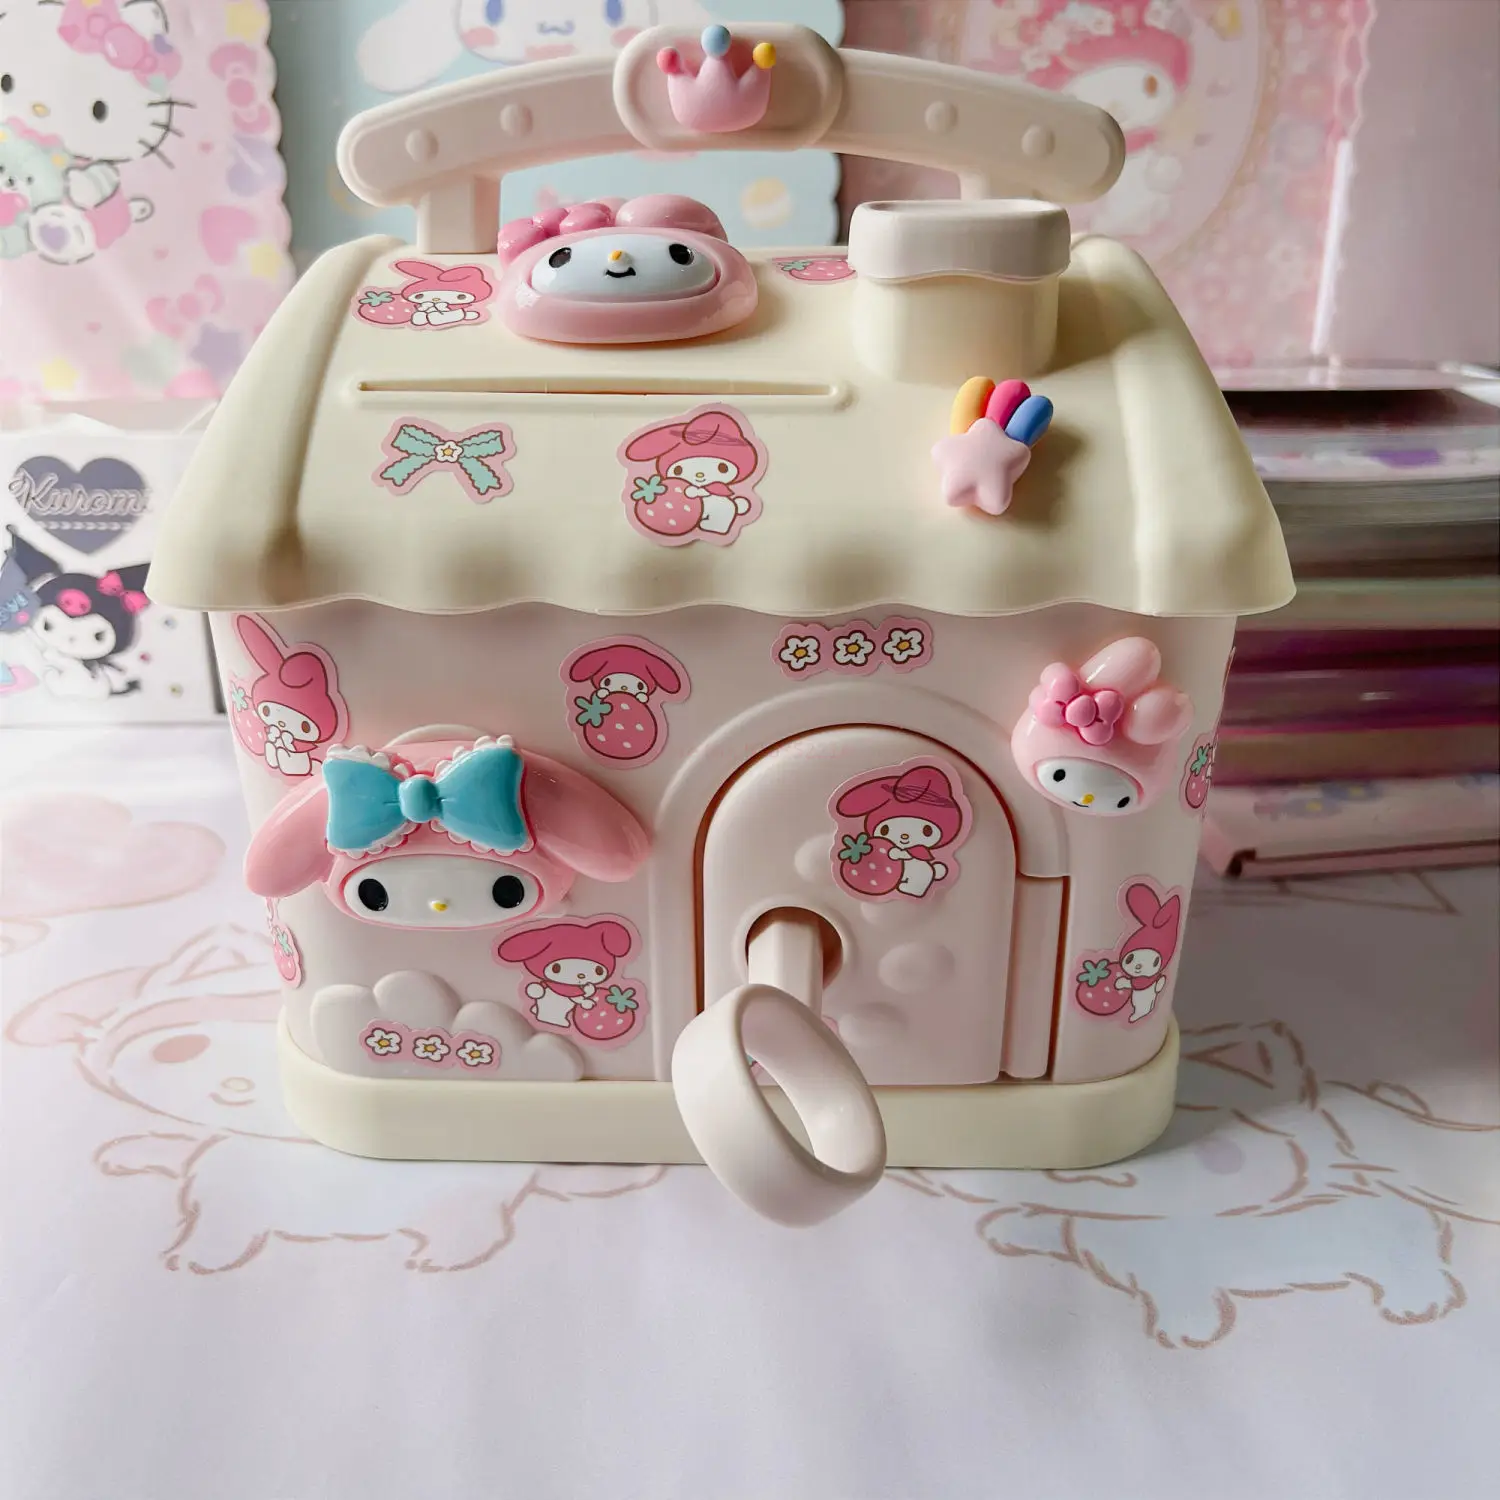 Sanrio My Melody Cinnamoroll Bank Anime Cartoon Cute Square Money Boxes Bank With Lock And Key For Notes Children Birthday Gifts